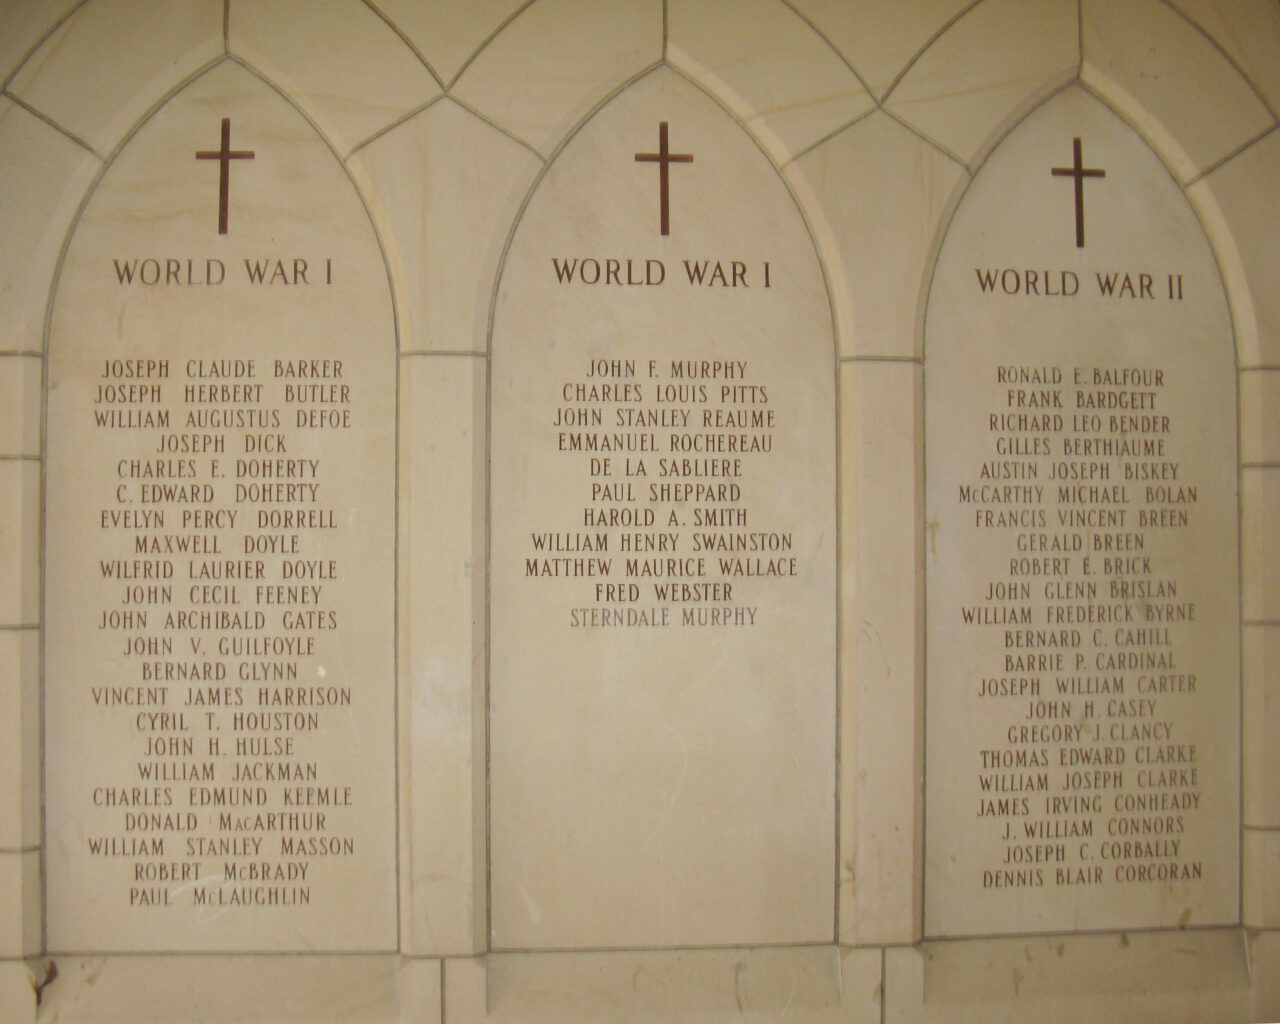 Photograph of the interior of the St. Michael's Soldiers’ Memorial Slype. Three panels include inscriptions of Crosses and "World War I" or "World War II" with lists of names.